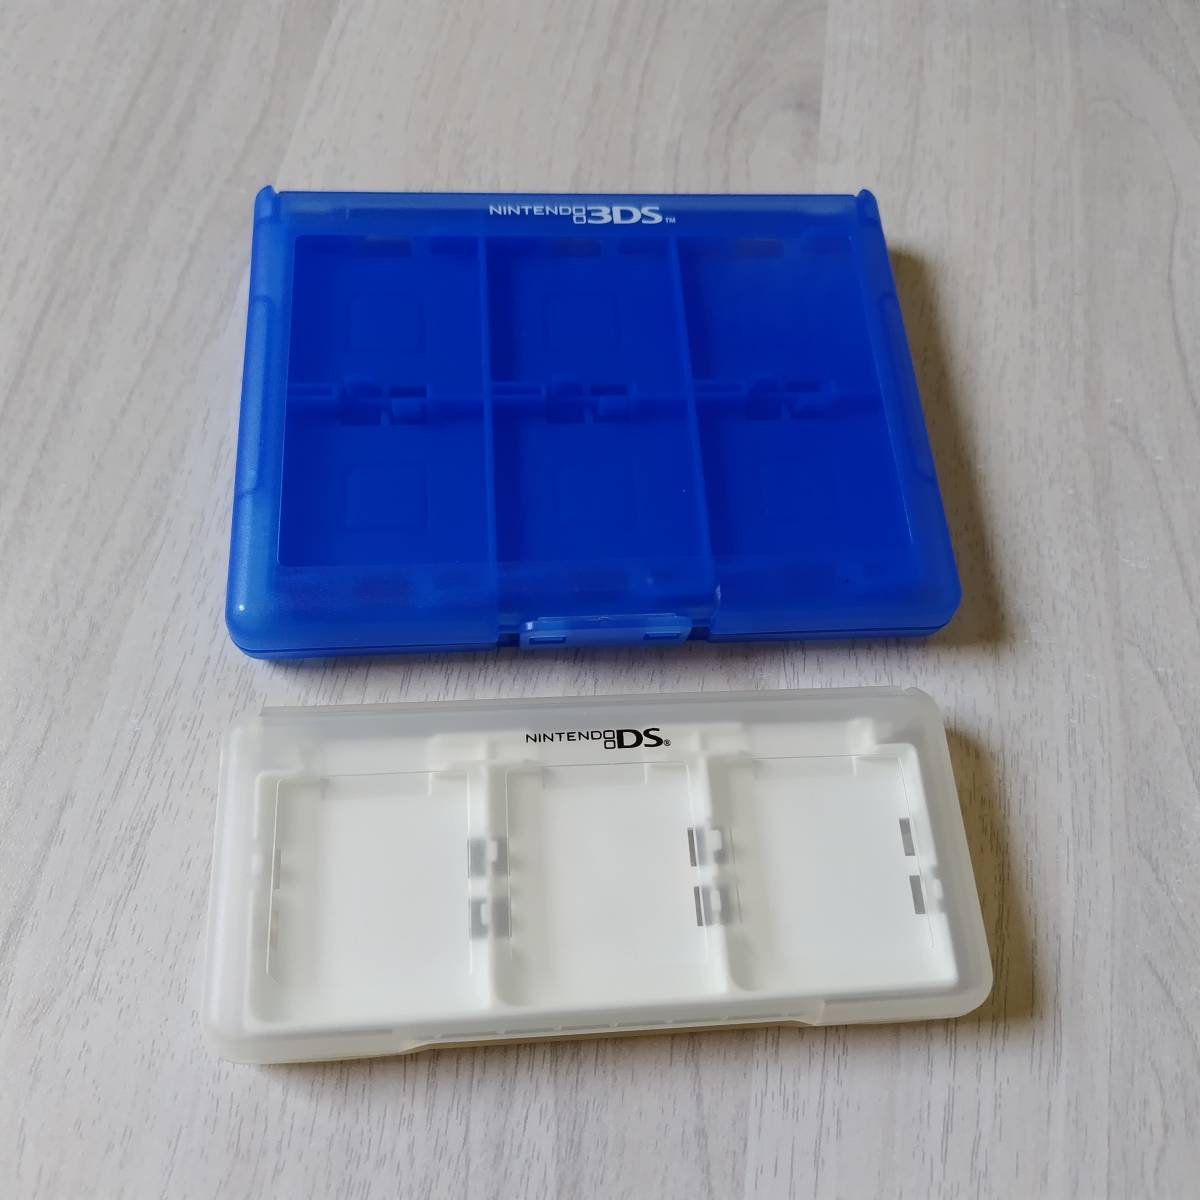 0 card-case 24 for Nintendo 3DS blue DS card-case what pcs . including in a package possible 0